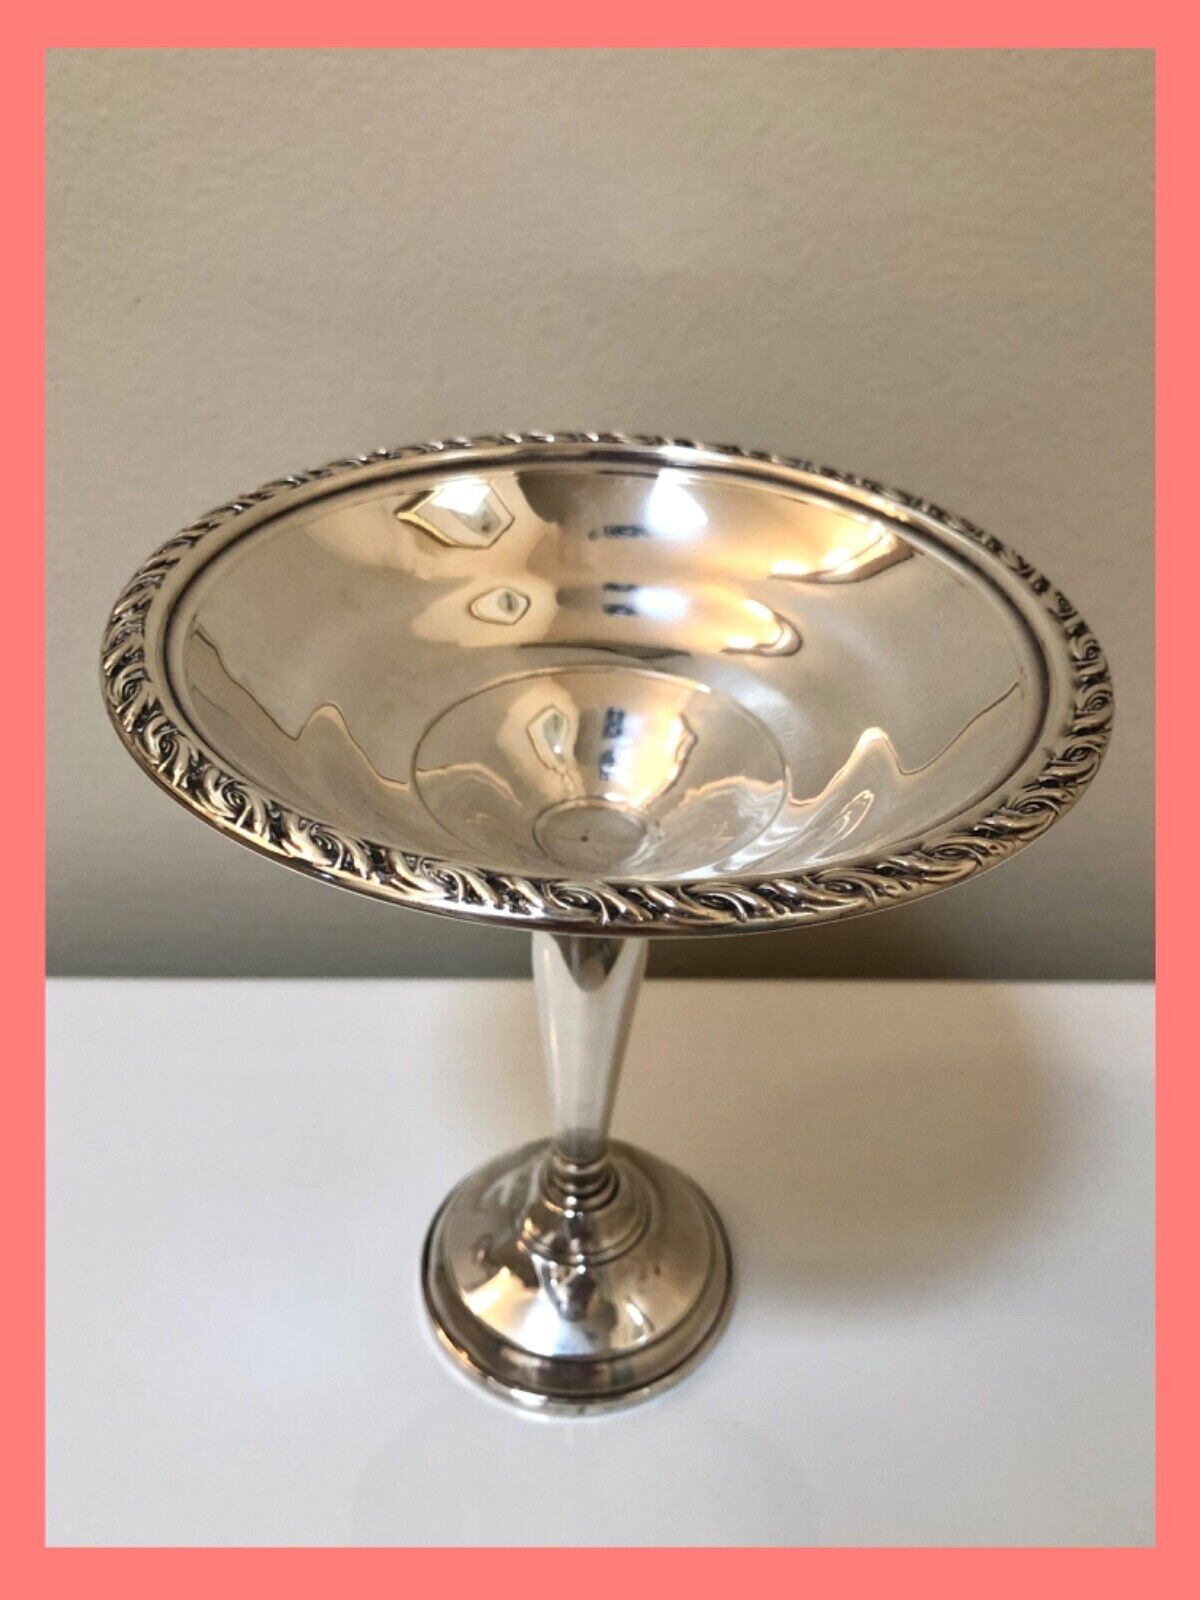 Vintage AMSTON STERLING SILVER Pedestal Compote/Candy Dish. Circa 1945-1950